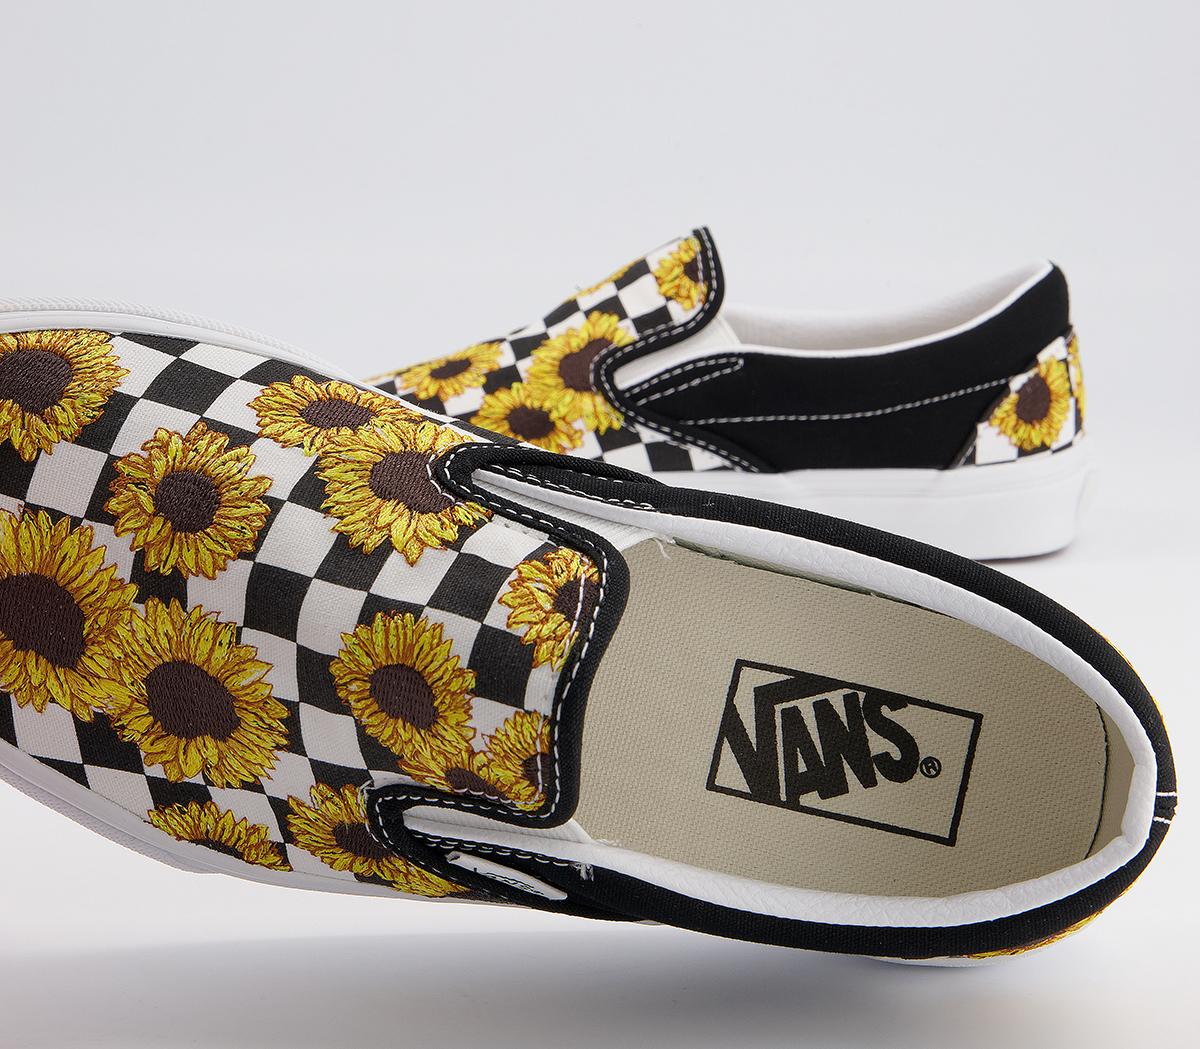 Vans Classic Slip On Trainers Sunflower Embroidery Black True White ...